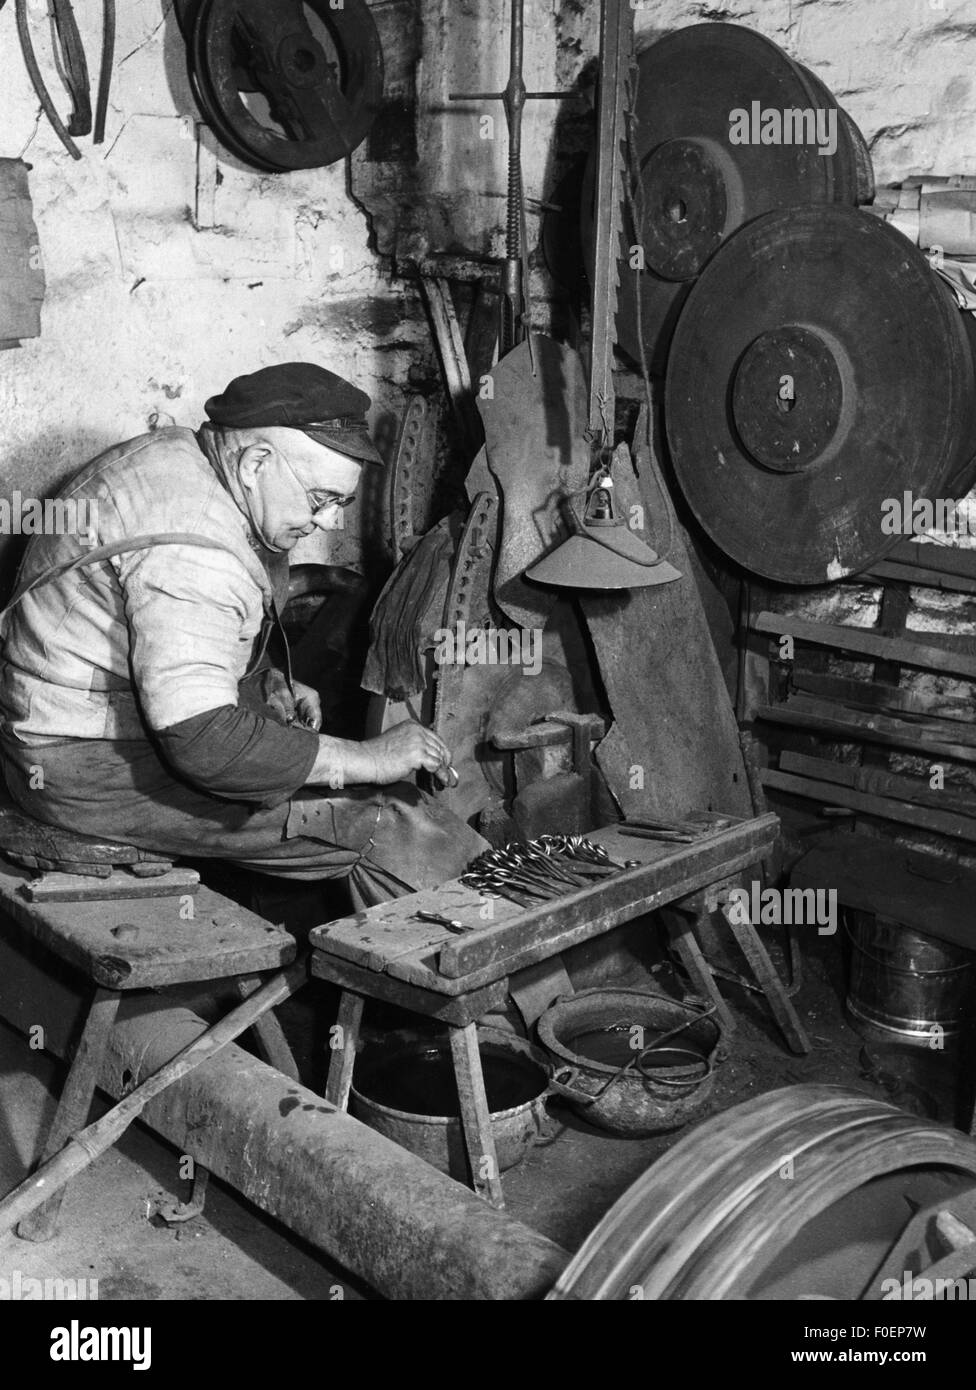 people, professions, scissors grinder, man working at a grinding machine, Bergisches Land, 1950s, Additional-Rights-Clearences-Not Available Stock Photo